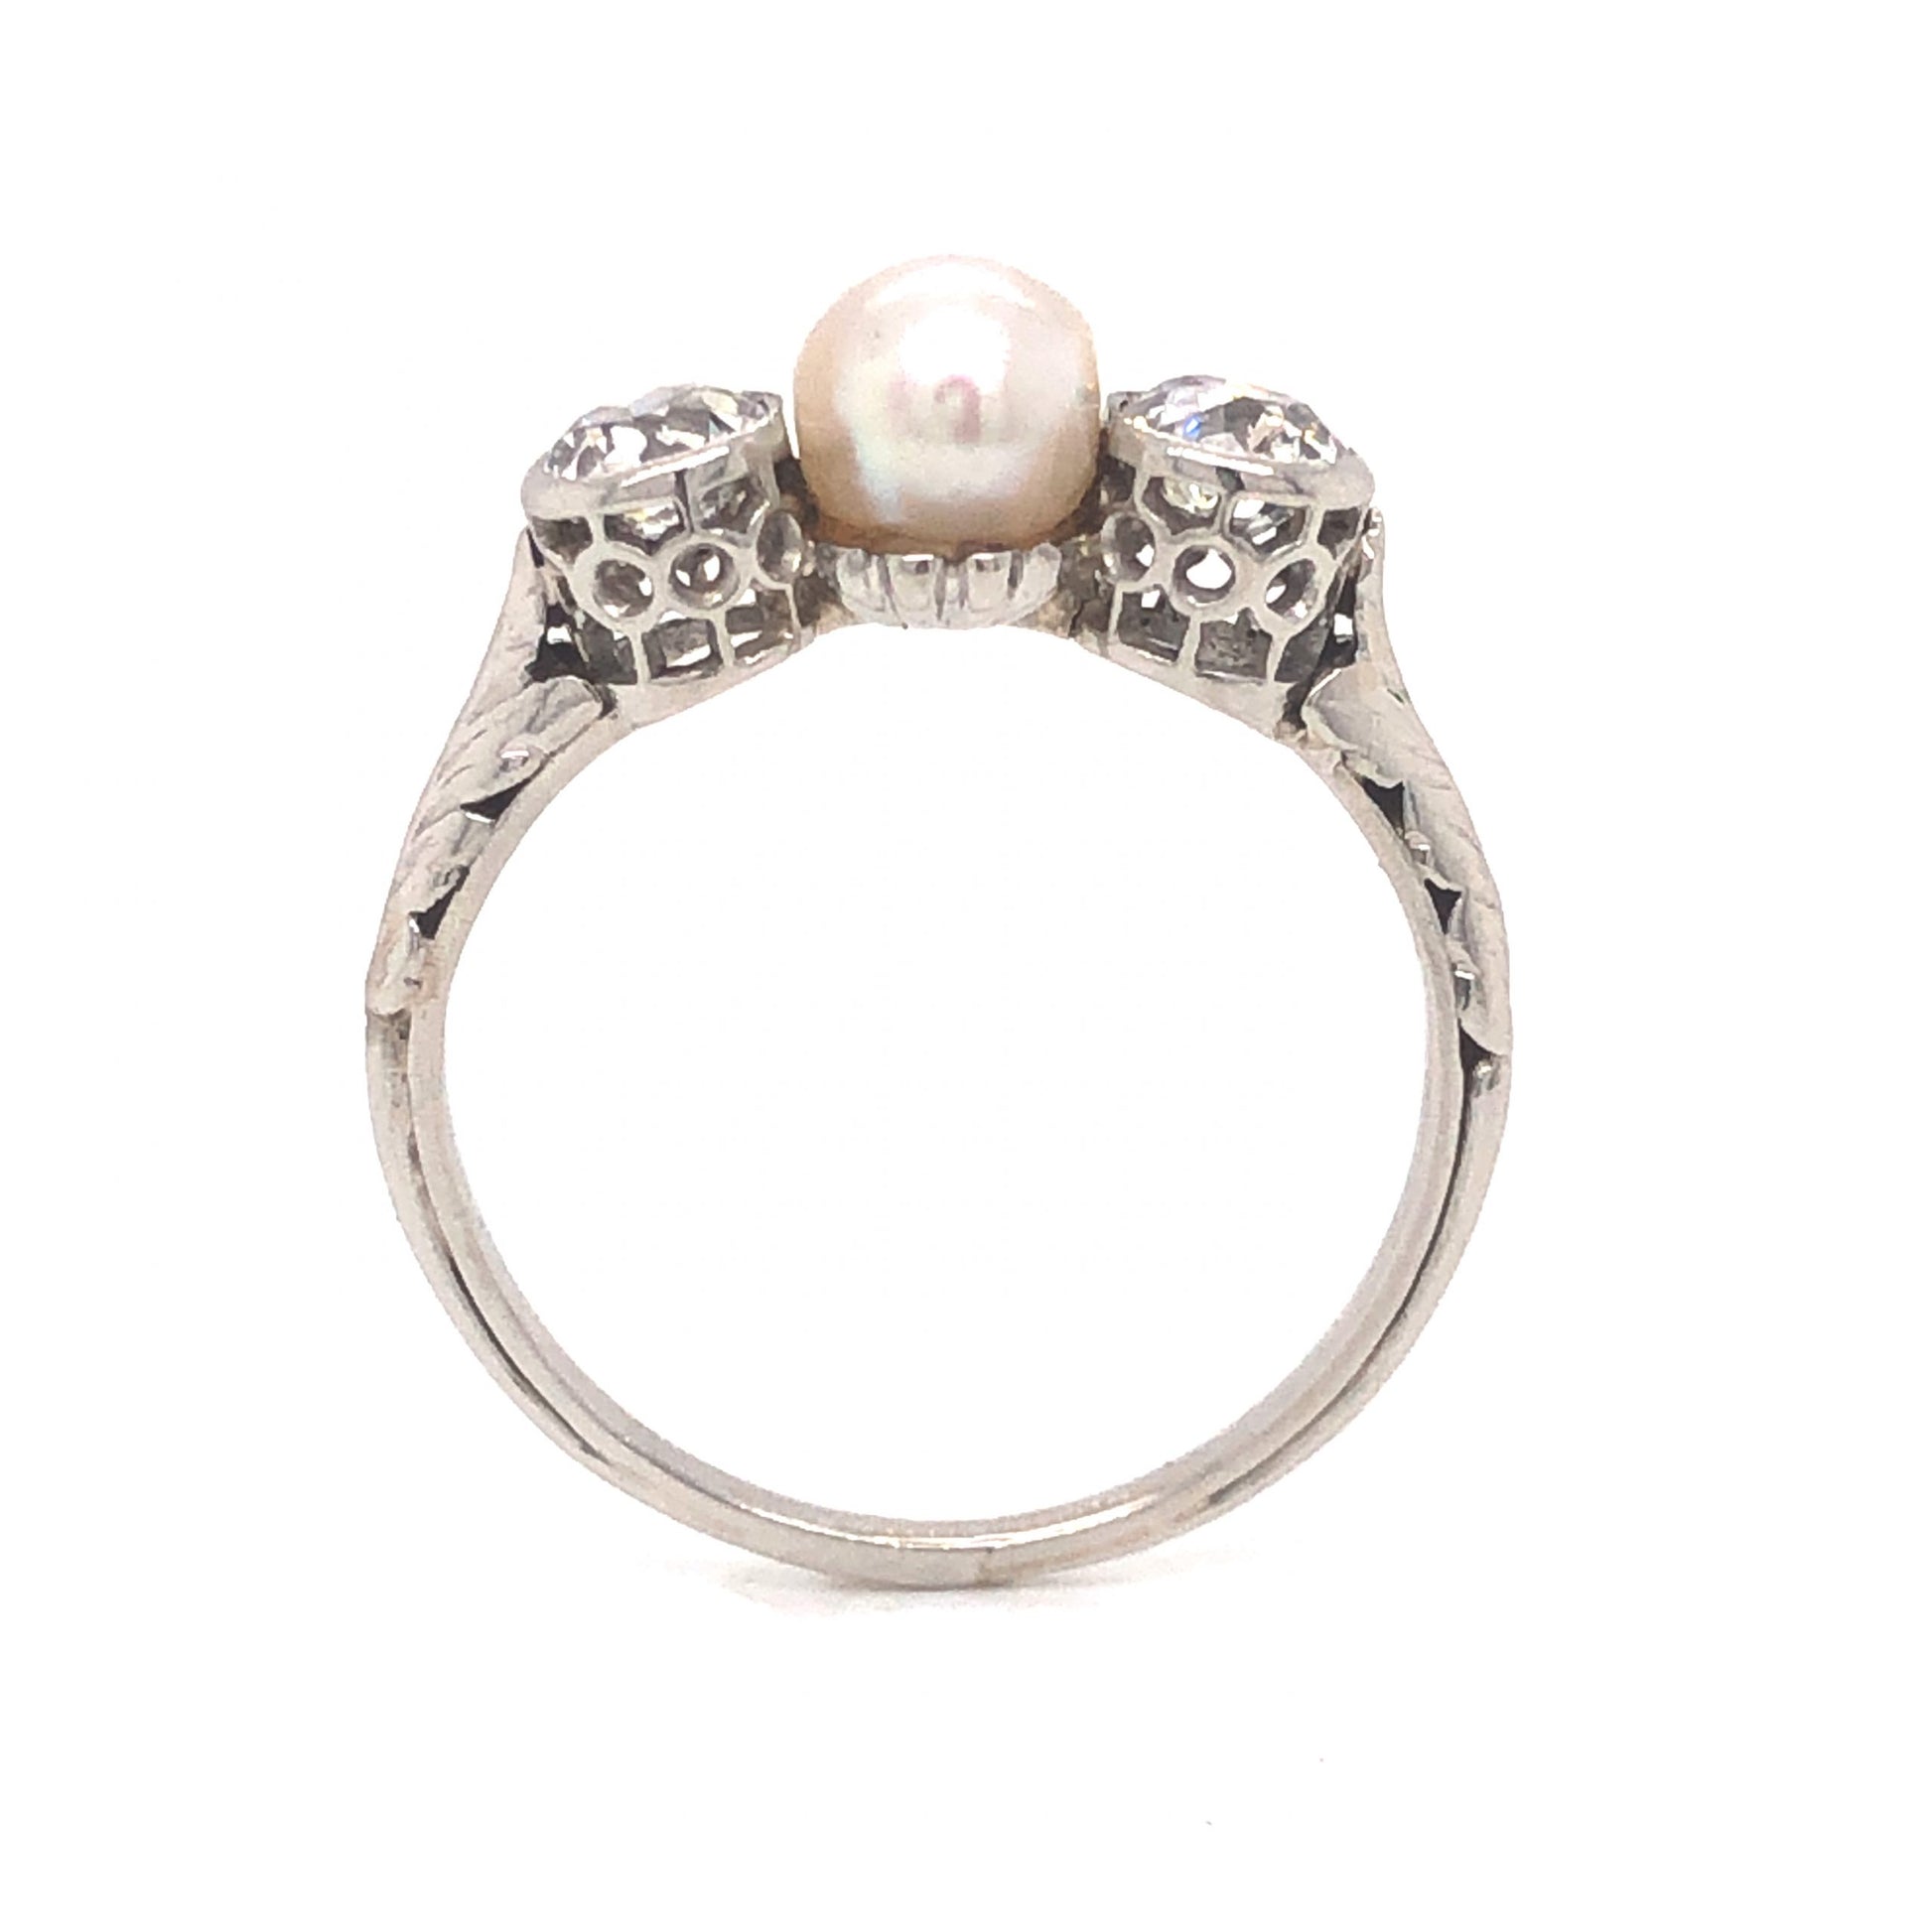 Art Deco Natural Pearl & Diamond Ring in PlatinumComposition: PlatinumRing Size: 6.25Total Diamond Weight: .52 ctTotal Gram Weight: 3.1 g